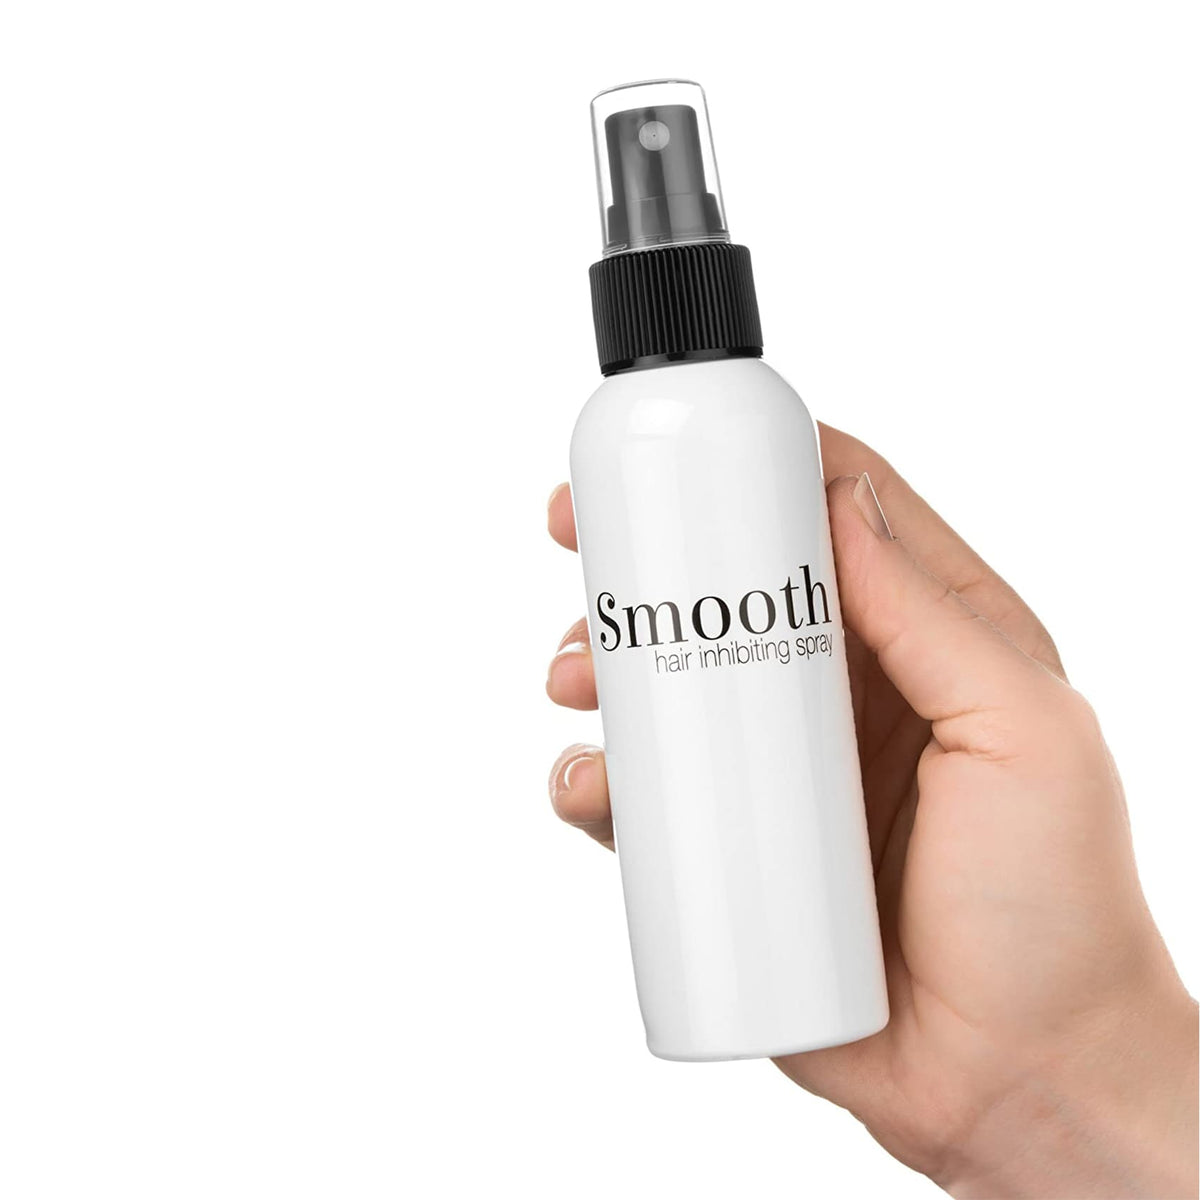 Smooth - Spray Best All Natural Hair Growth Inhibitor Spray - Minimizes Regrowth - Only Tasty Goods Inc.